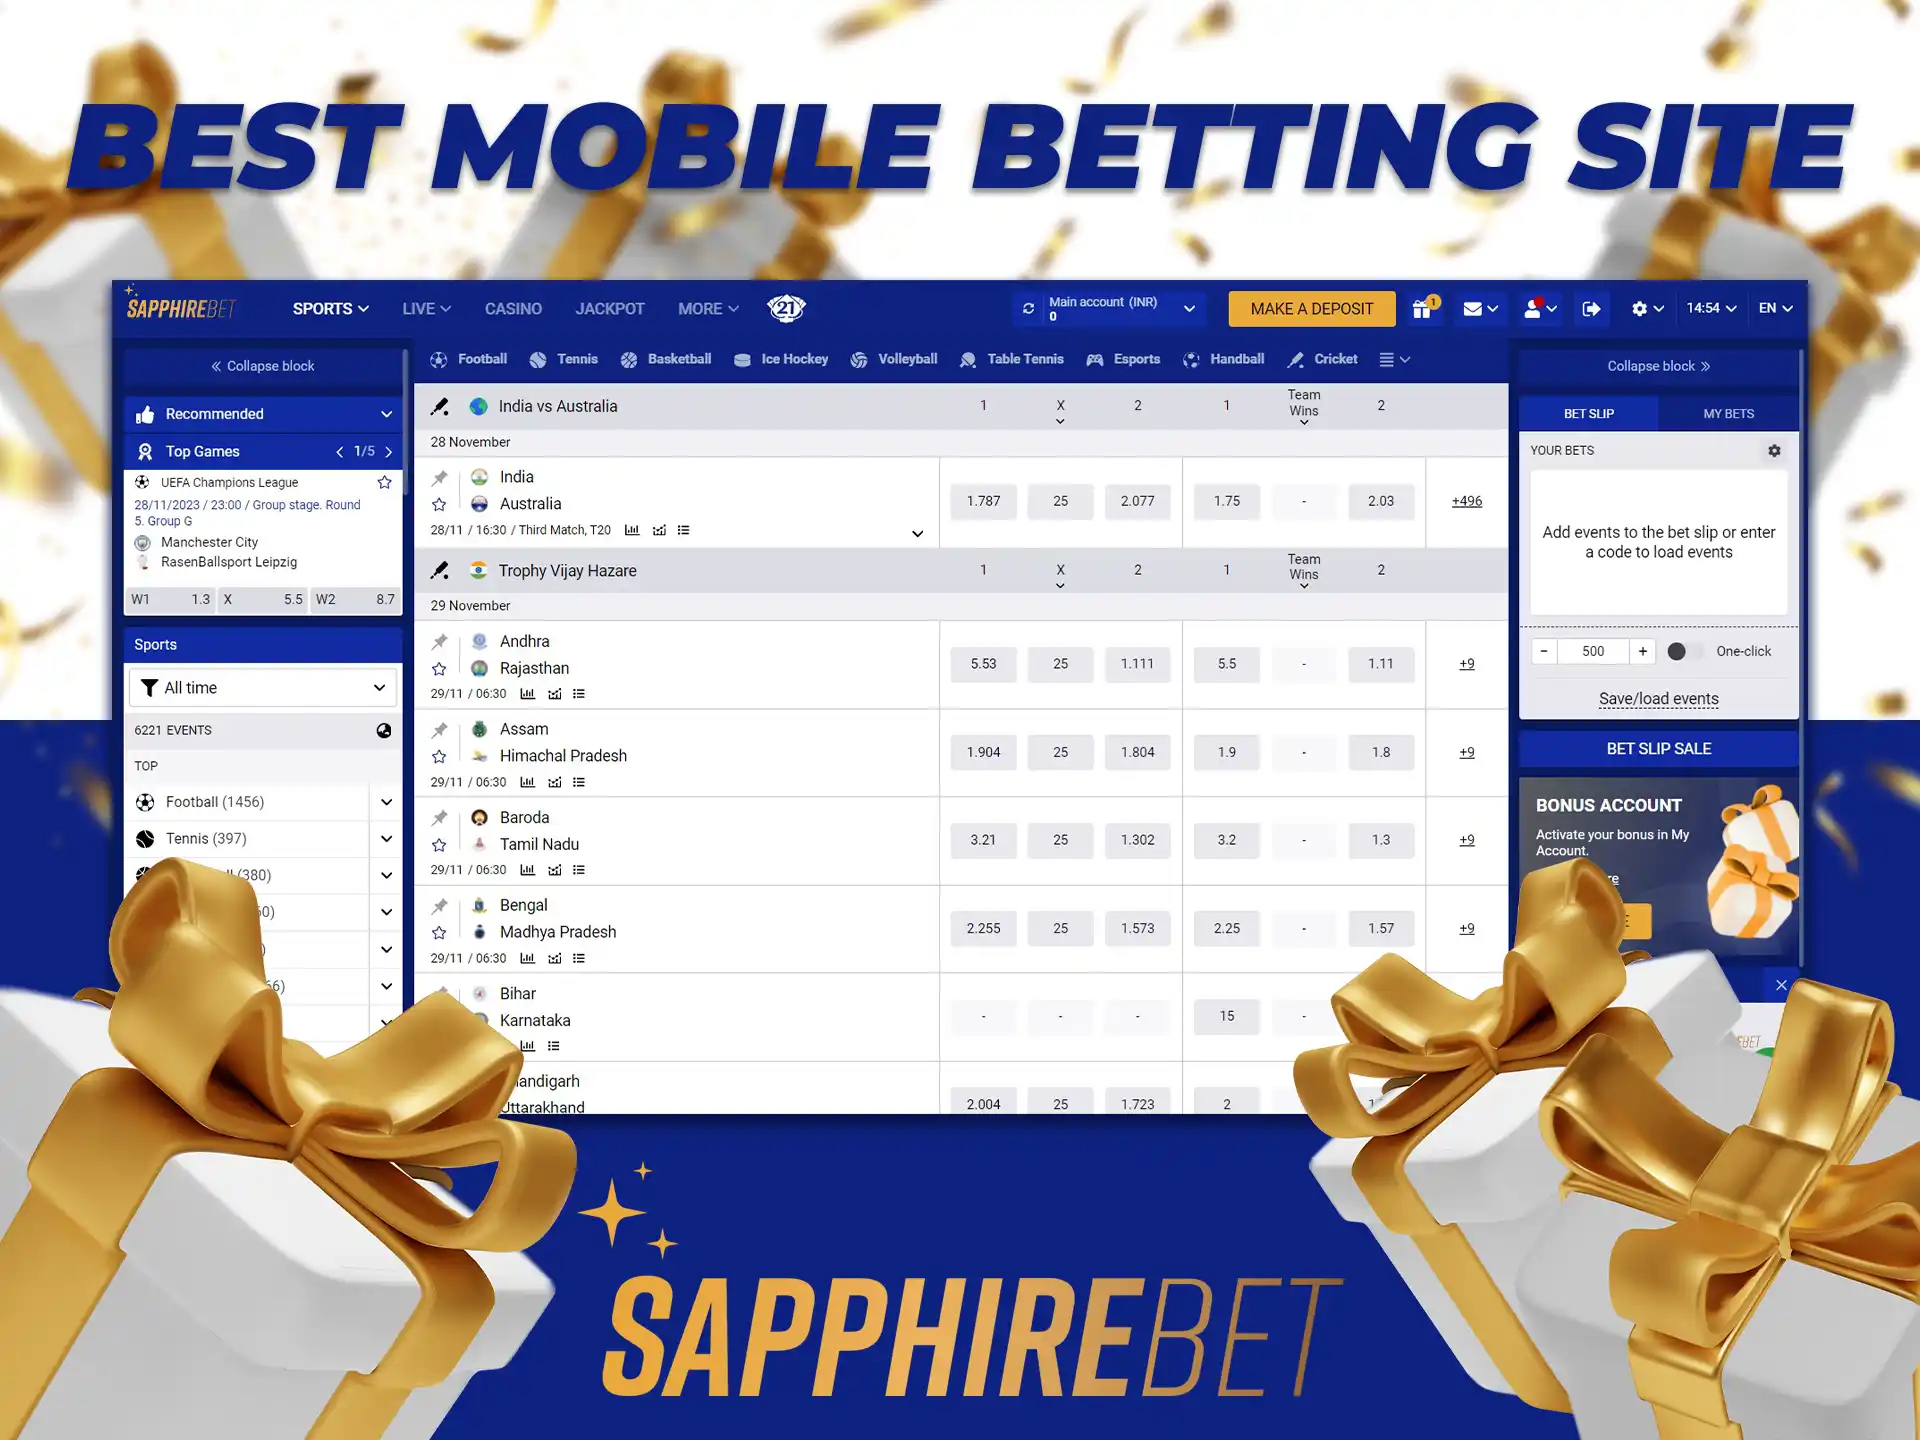 Sapphirebet is the choice of experienced bettors and the best betting exchange site.